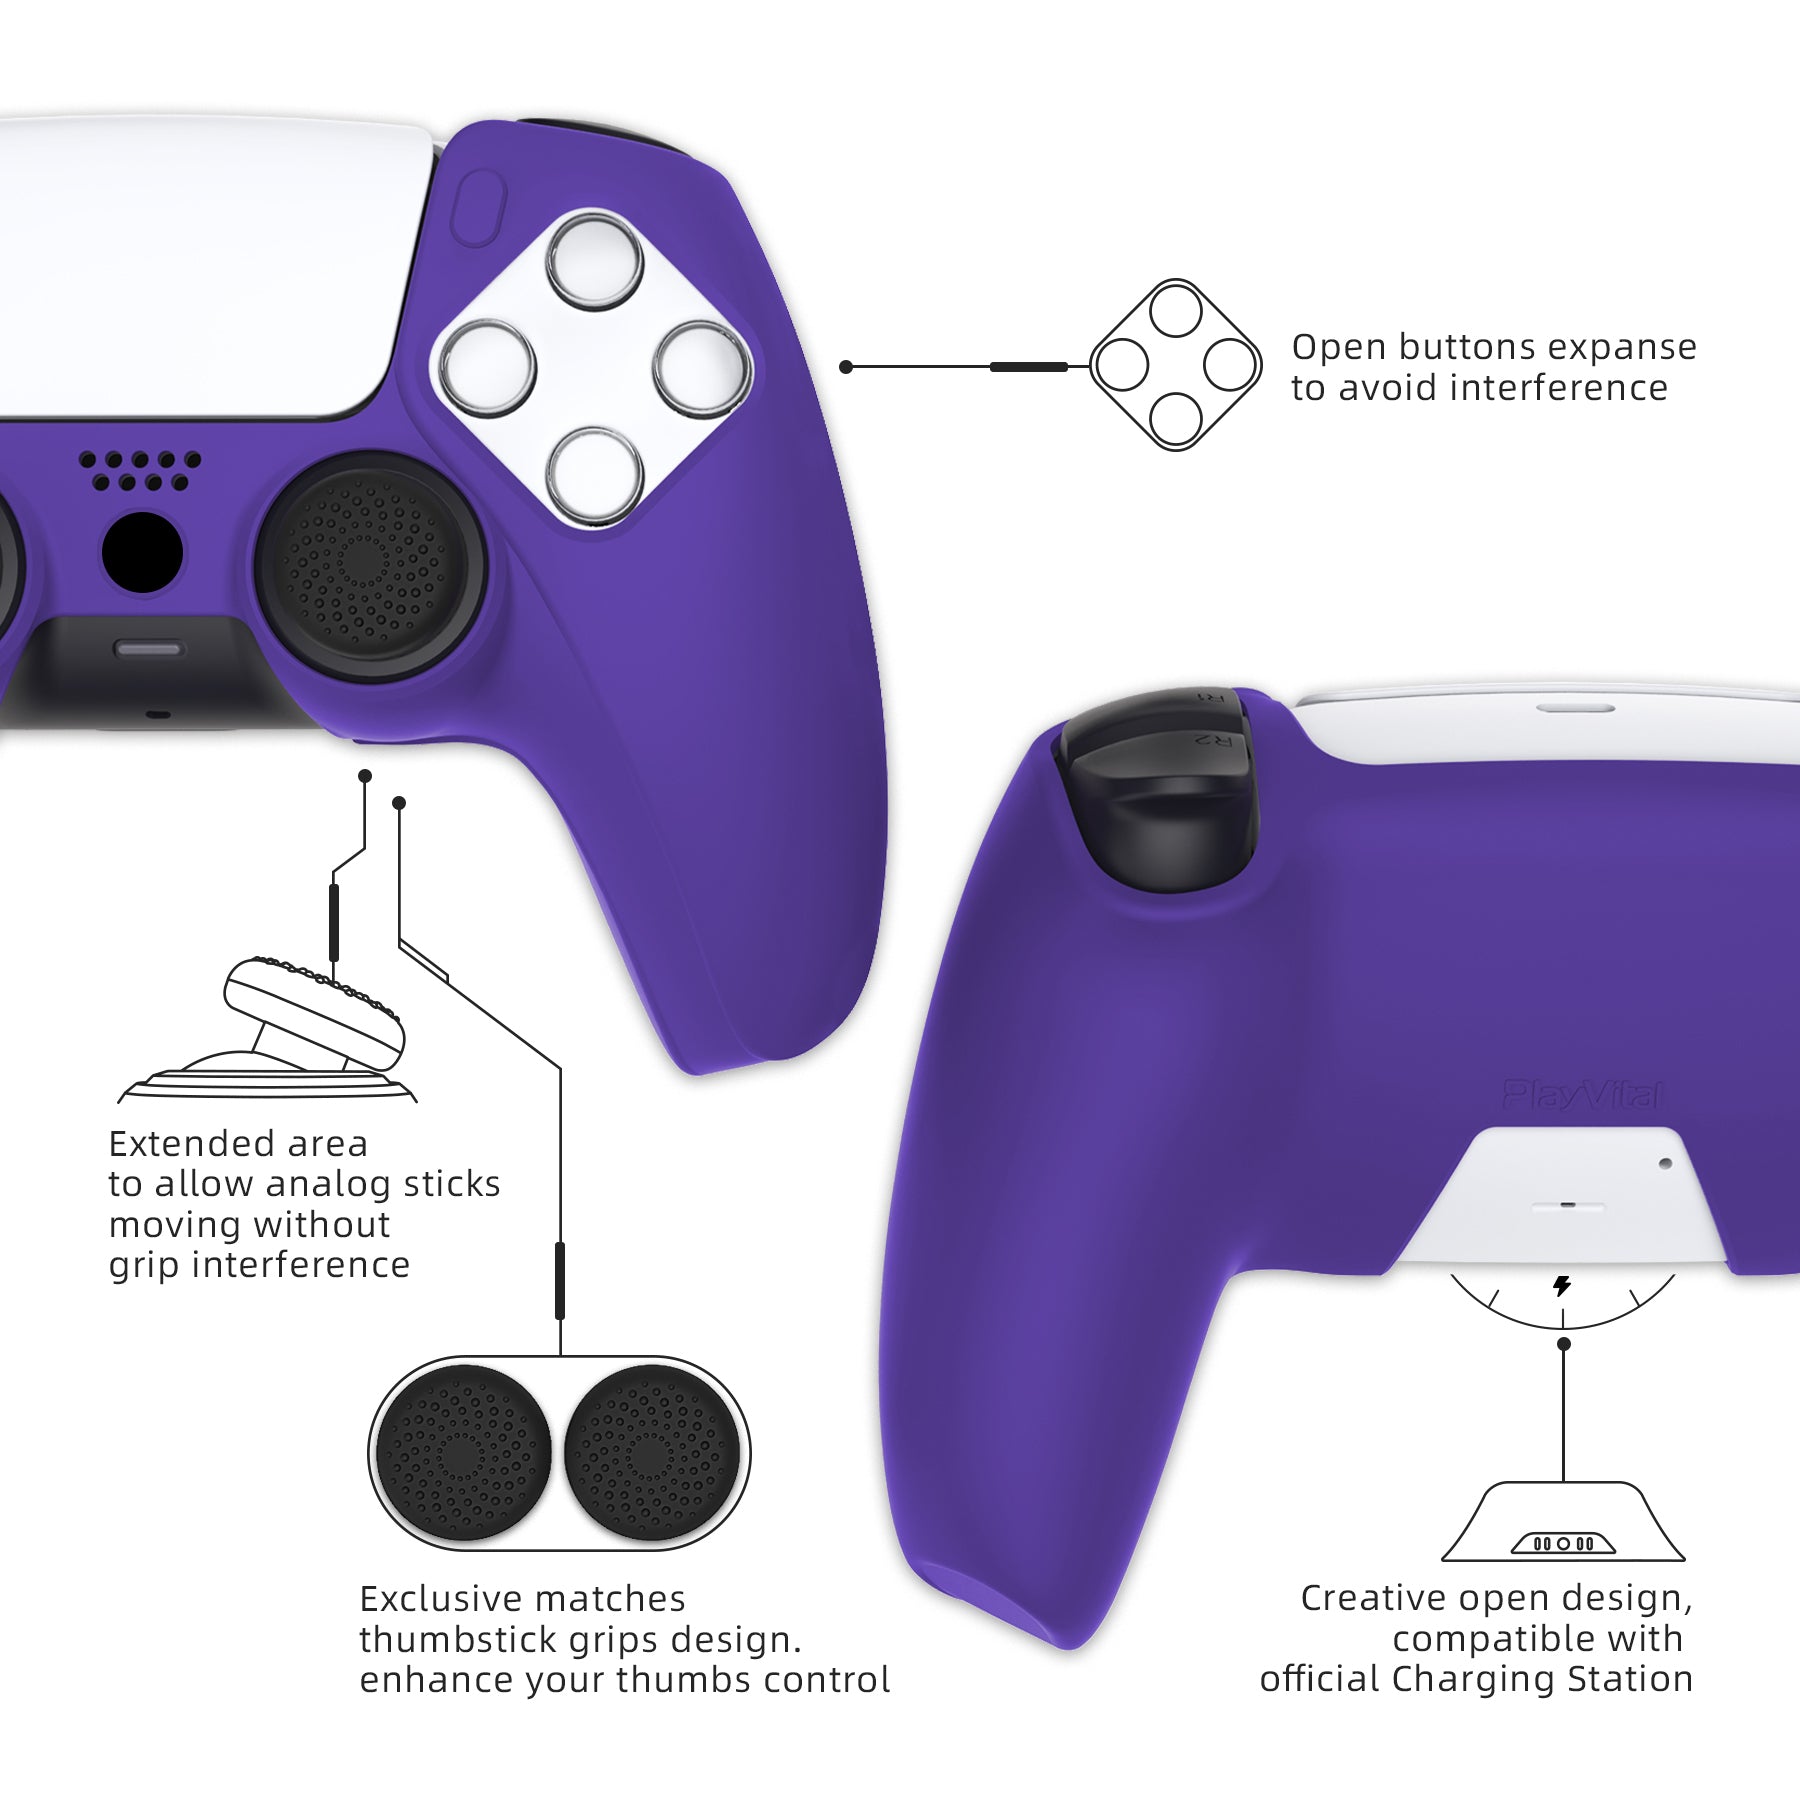 PlayVital Pure Series Ergonomic Anti-Slip Silicone Cover Skin with Thumb Grip Caps for PS5 Wireless Controller - Compatible with Charging Station - Purple - EKPFP006 PlayVital